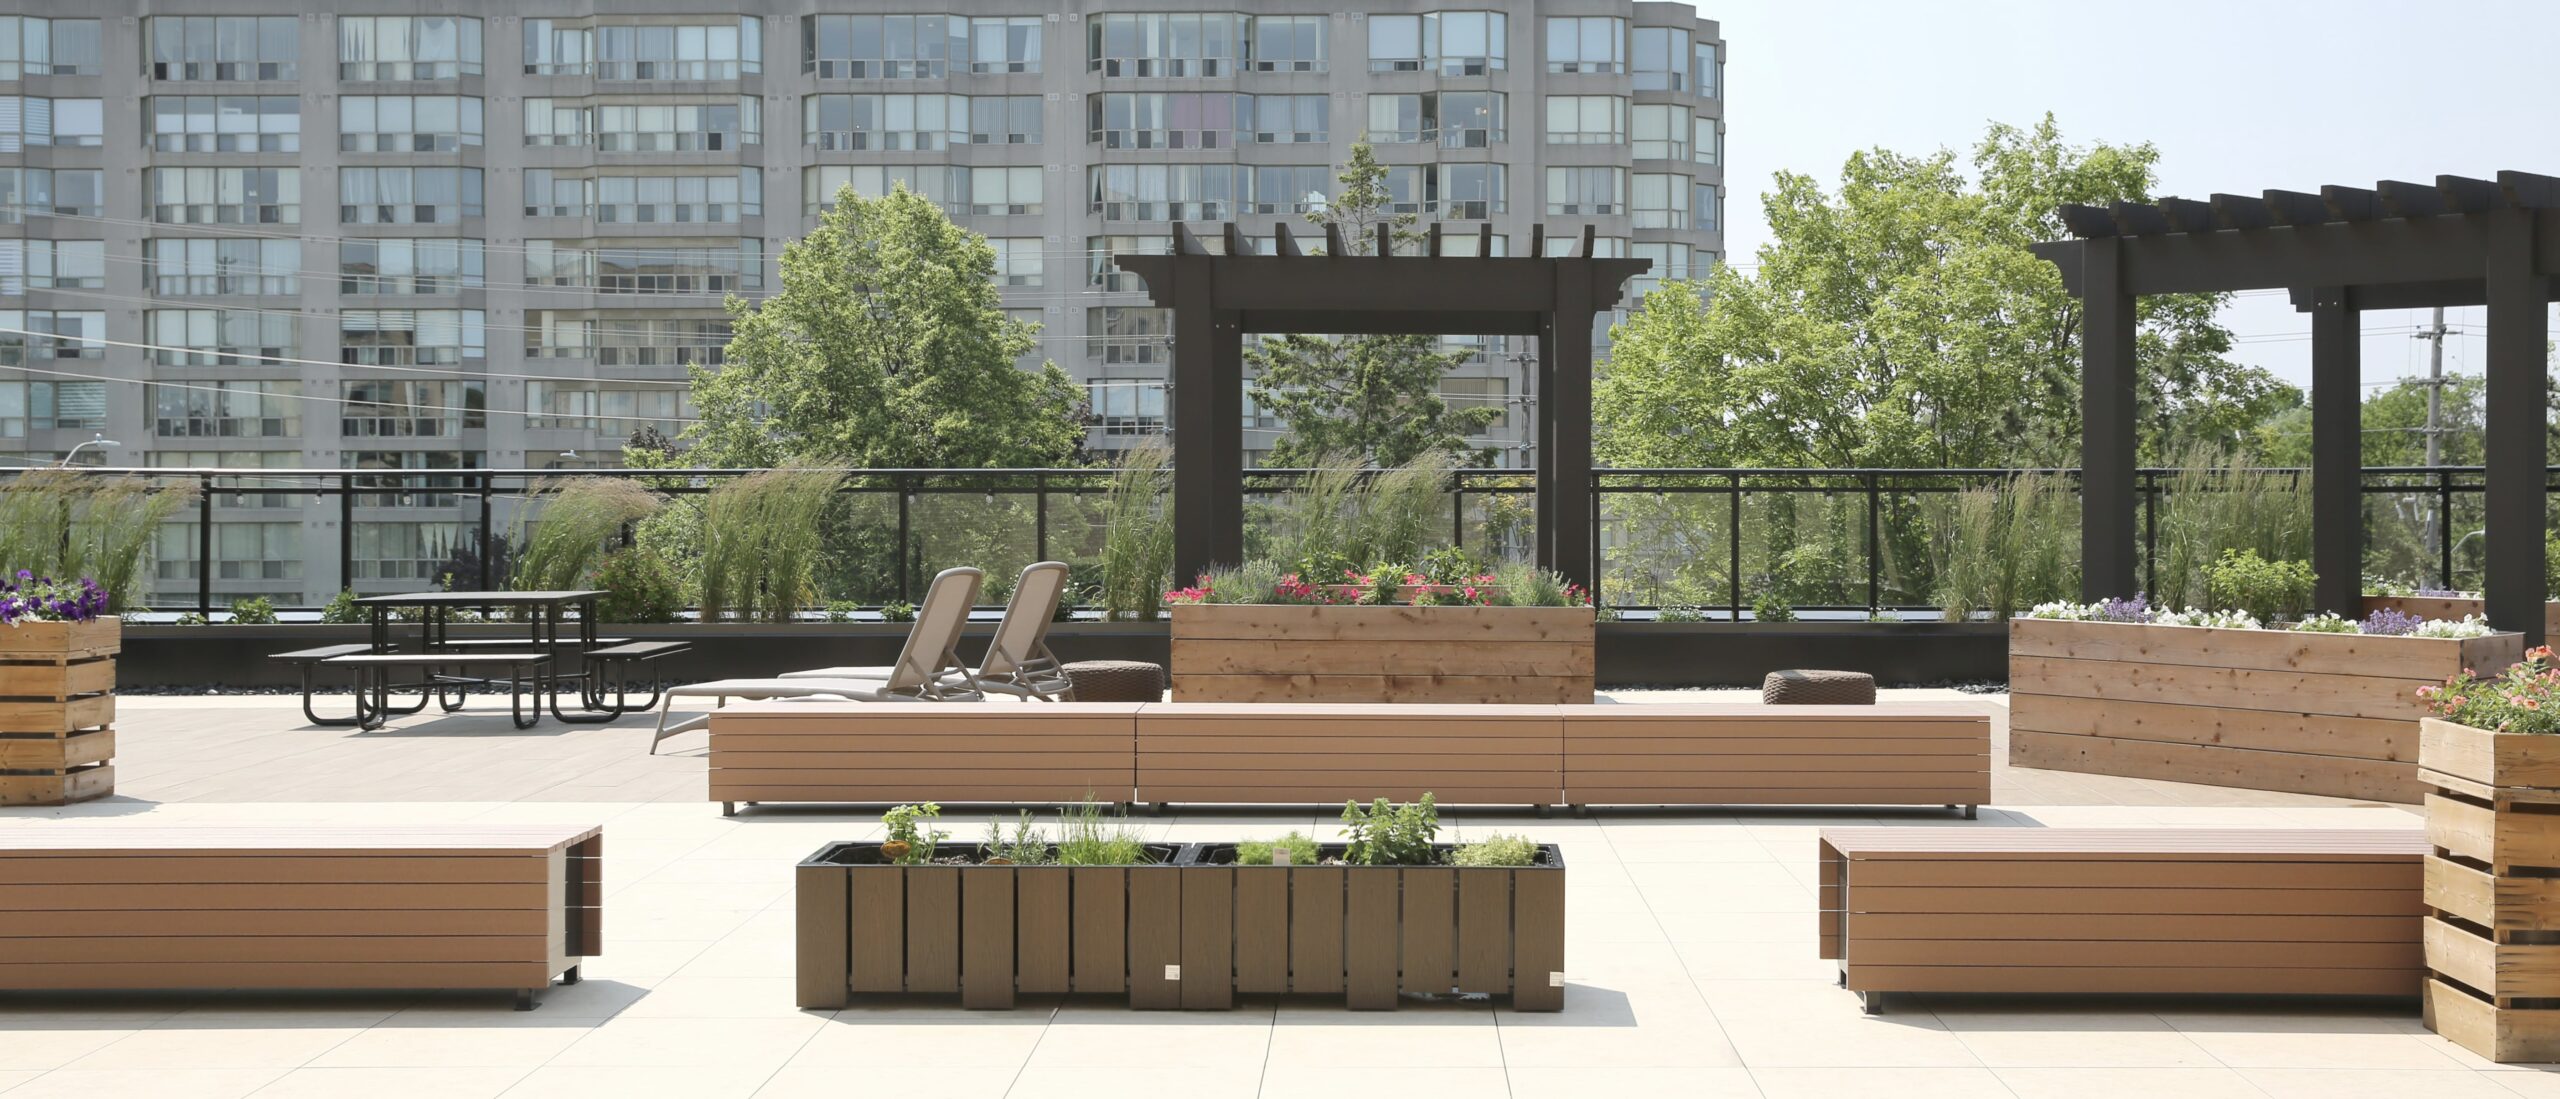 COMMERCIAL FURNITURE OUTDOOR PROJECT - OUTDOOR COMMERCIAL BENCH CAB-603 & COMMERCIAL PATIO PLANTER CAP-107 BANNER